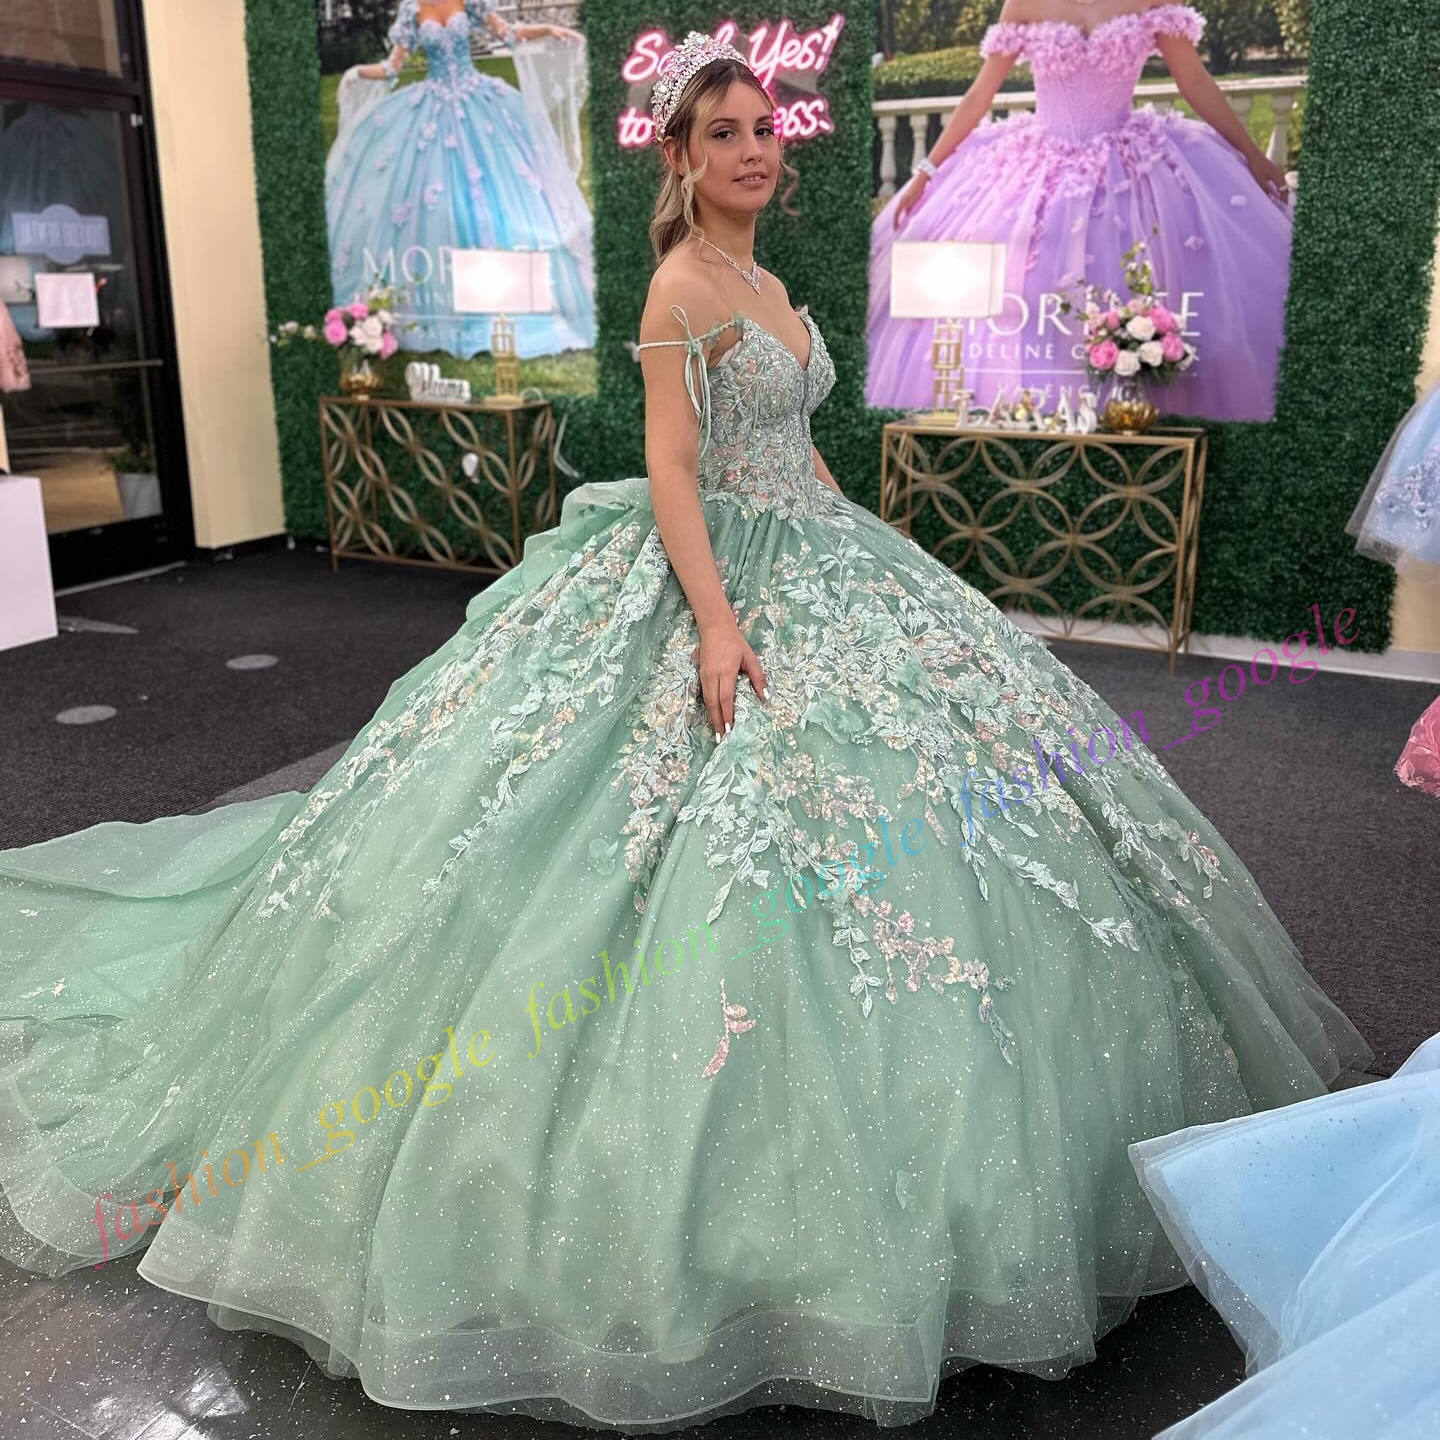 3D Floral Ceirzy Quinceanera Dress Glitter Tiulle Ball Mexican Quince Sweet 15/16 Urodziny suknia na 15. dziewczyna dramat zima formalna gala promocyjna Orchid Sage Bow Bowp